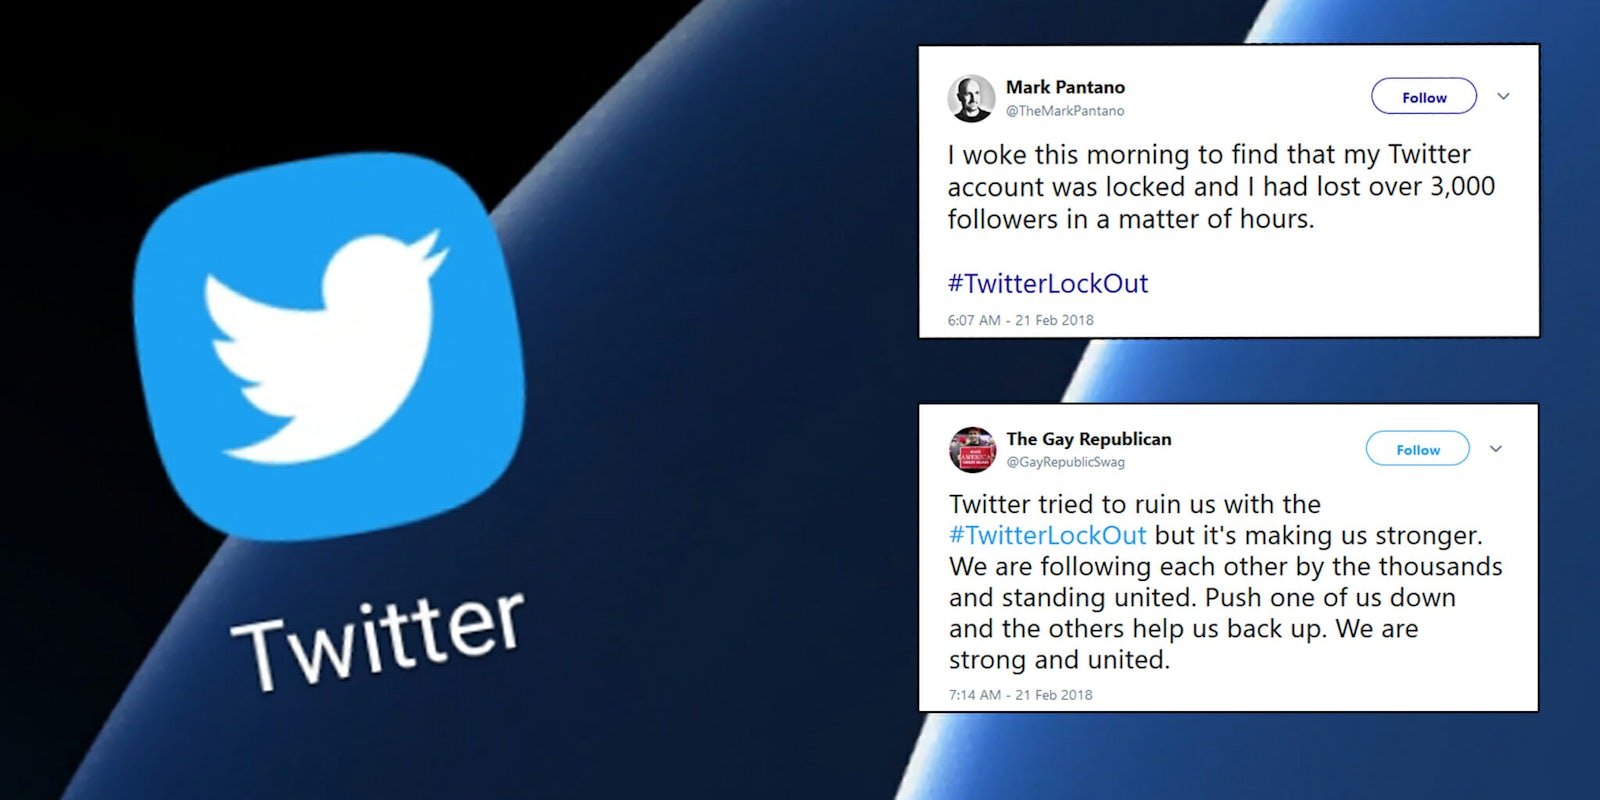 Conservative Twitter users are angry they lost thousands of followers on the social media platform, culminating in #TwitterLockout trending on Wednesday.